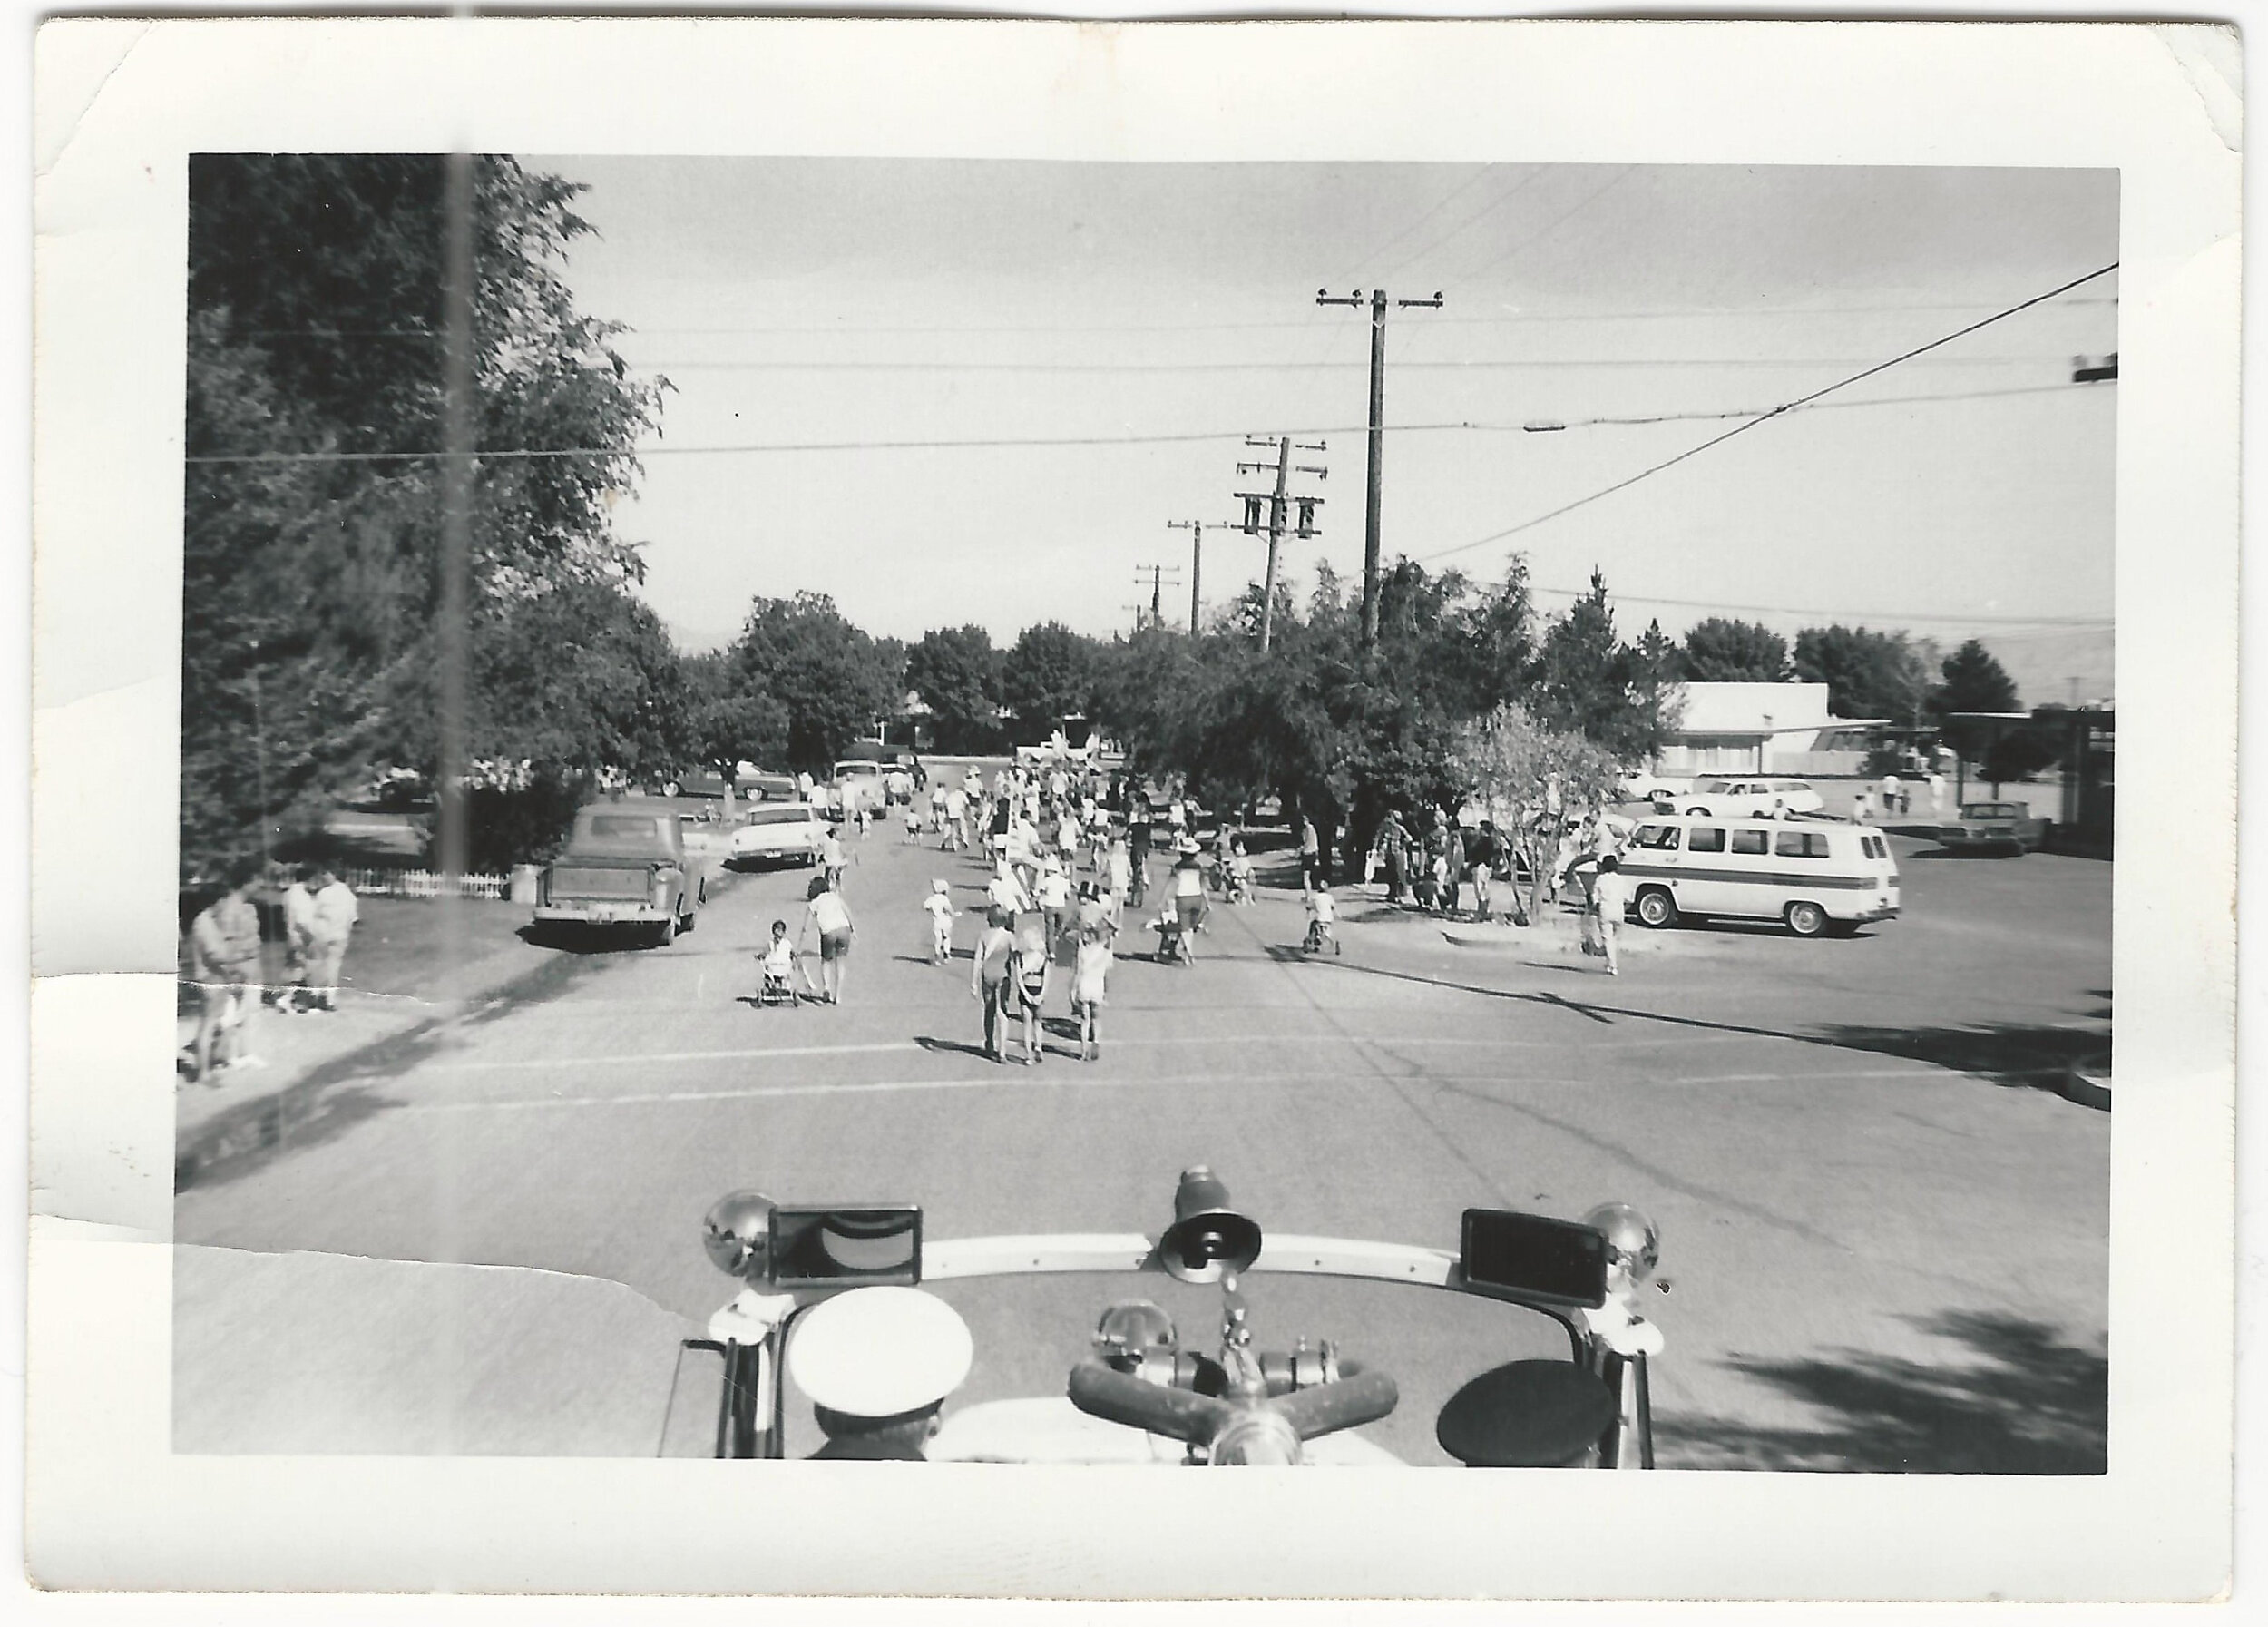 Town parade on Caliente Ave. 